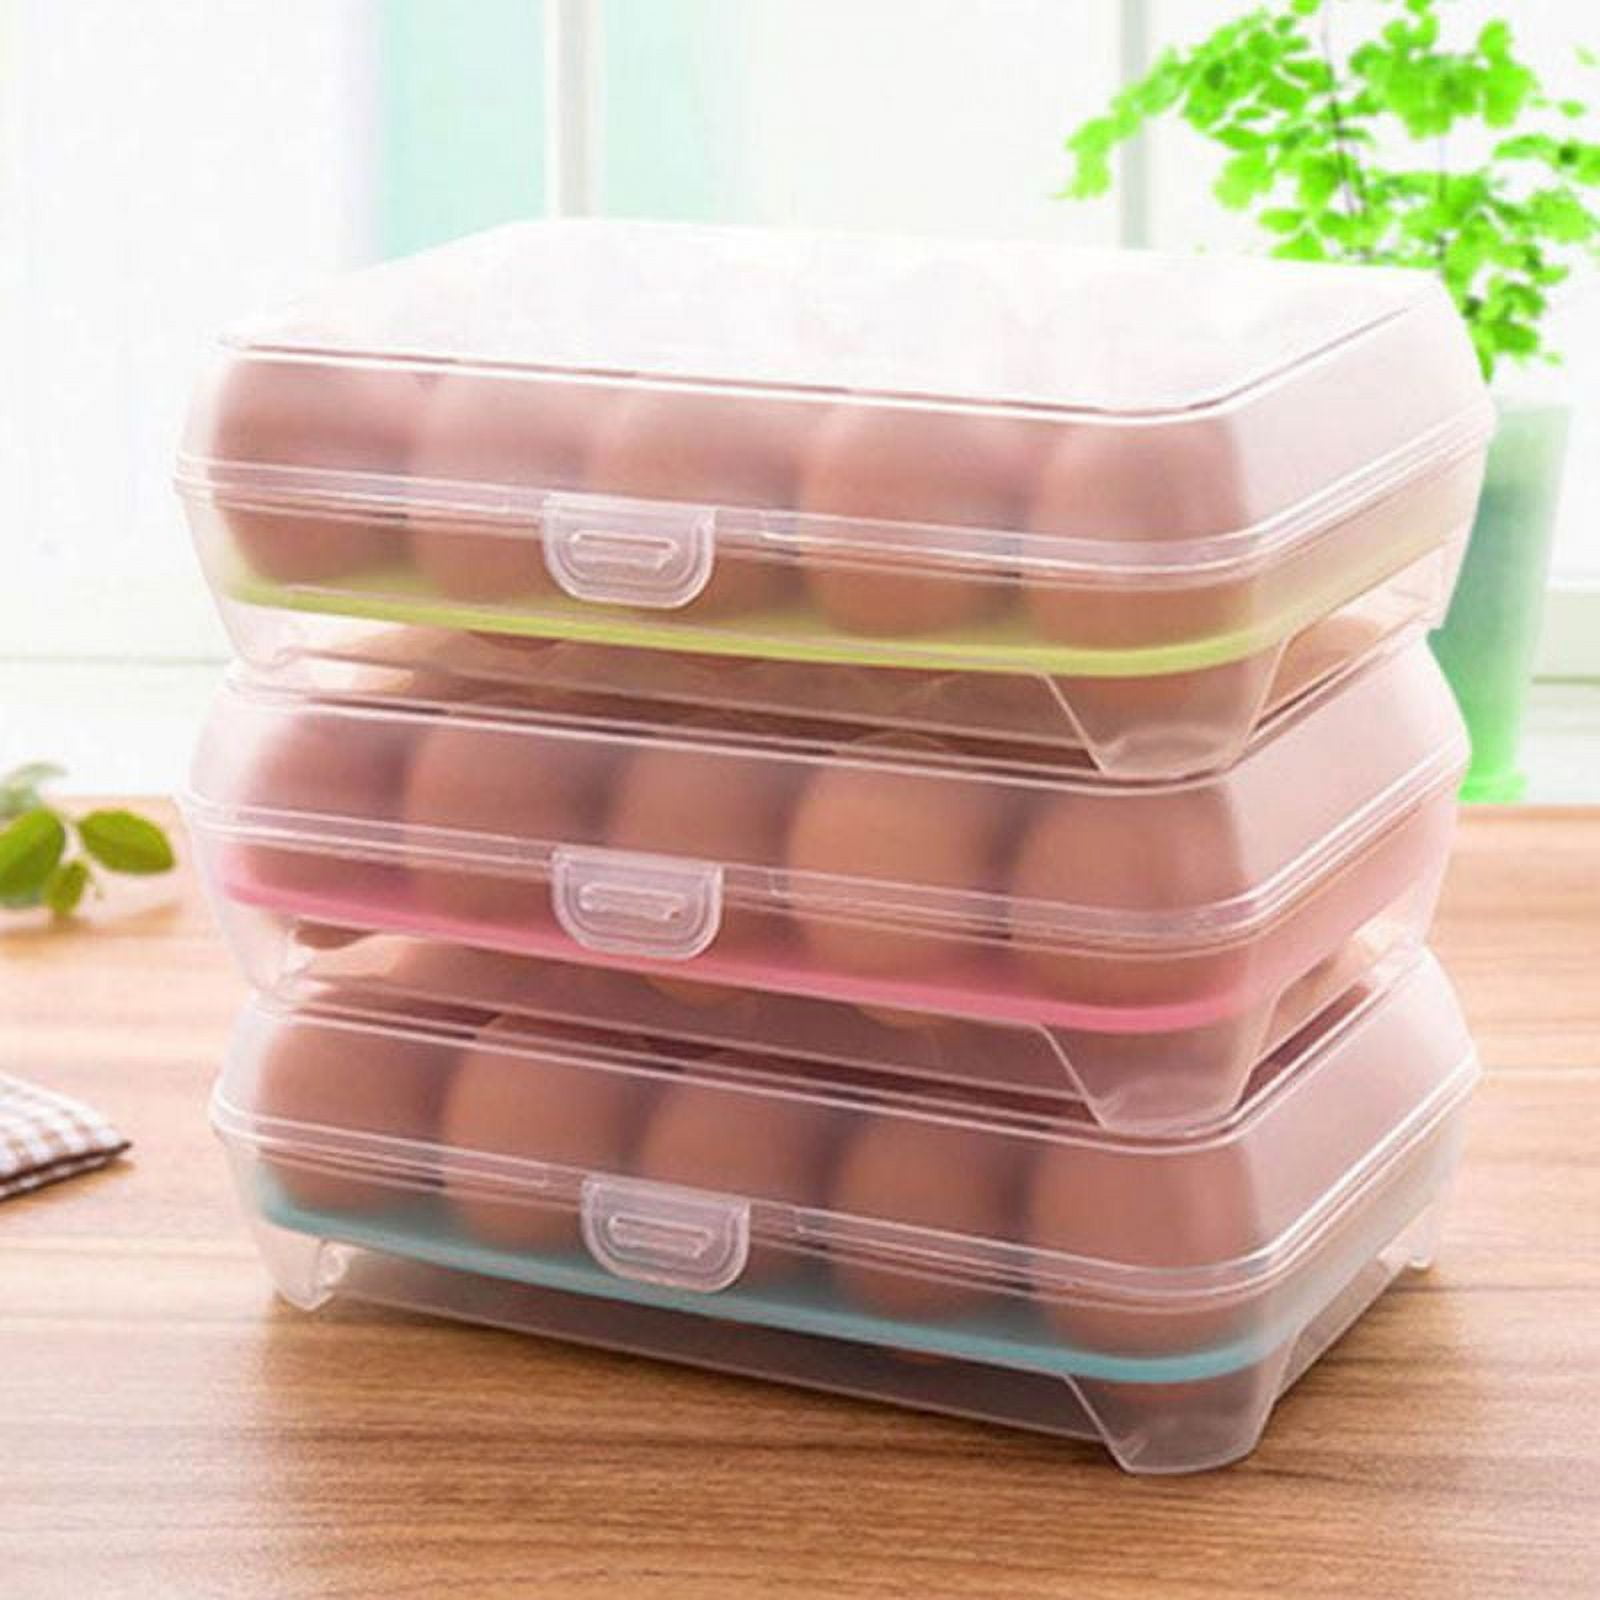  Boseen Egg Holder for Refrigerator, Deviled Egg Containers  Large Plastic Egg Tray Carrier for Fridge Kitchen Egg Storage Compact  Stackable Durable Clear with Lid Fits 48 Eggs 2 Pack : Appliances